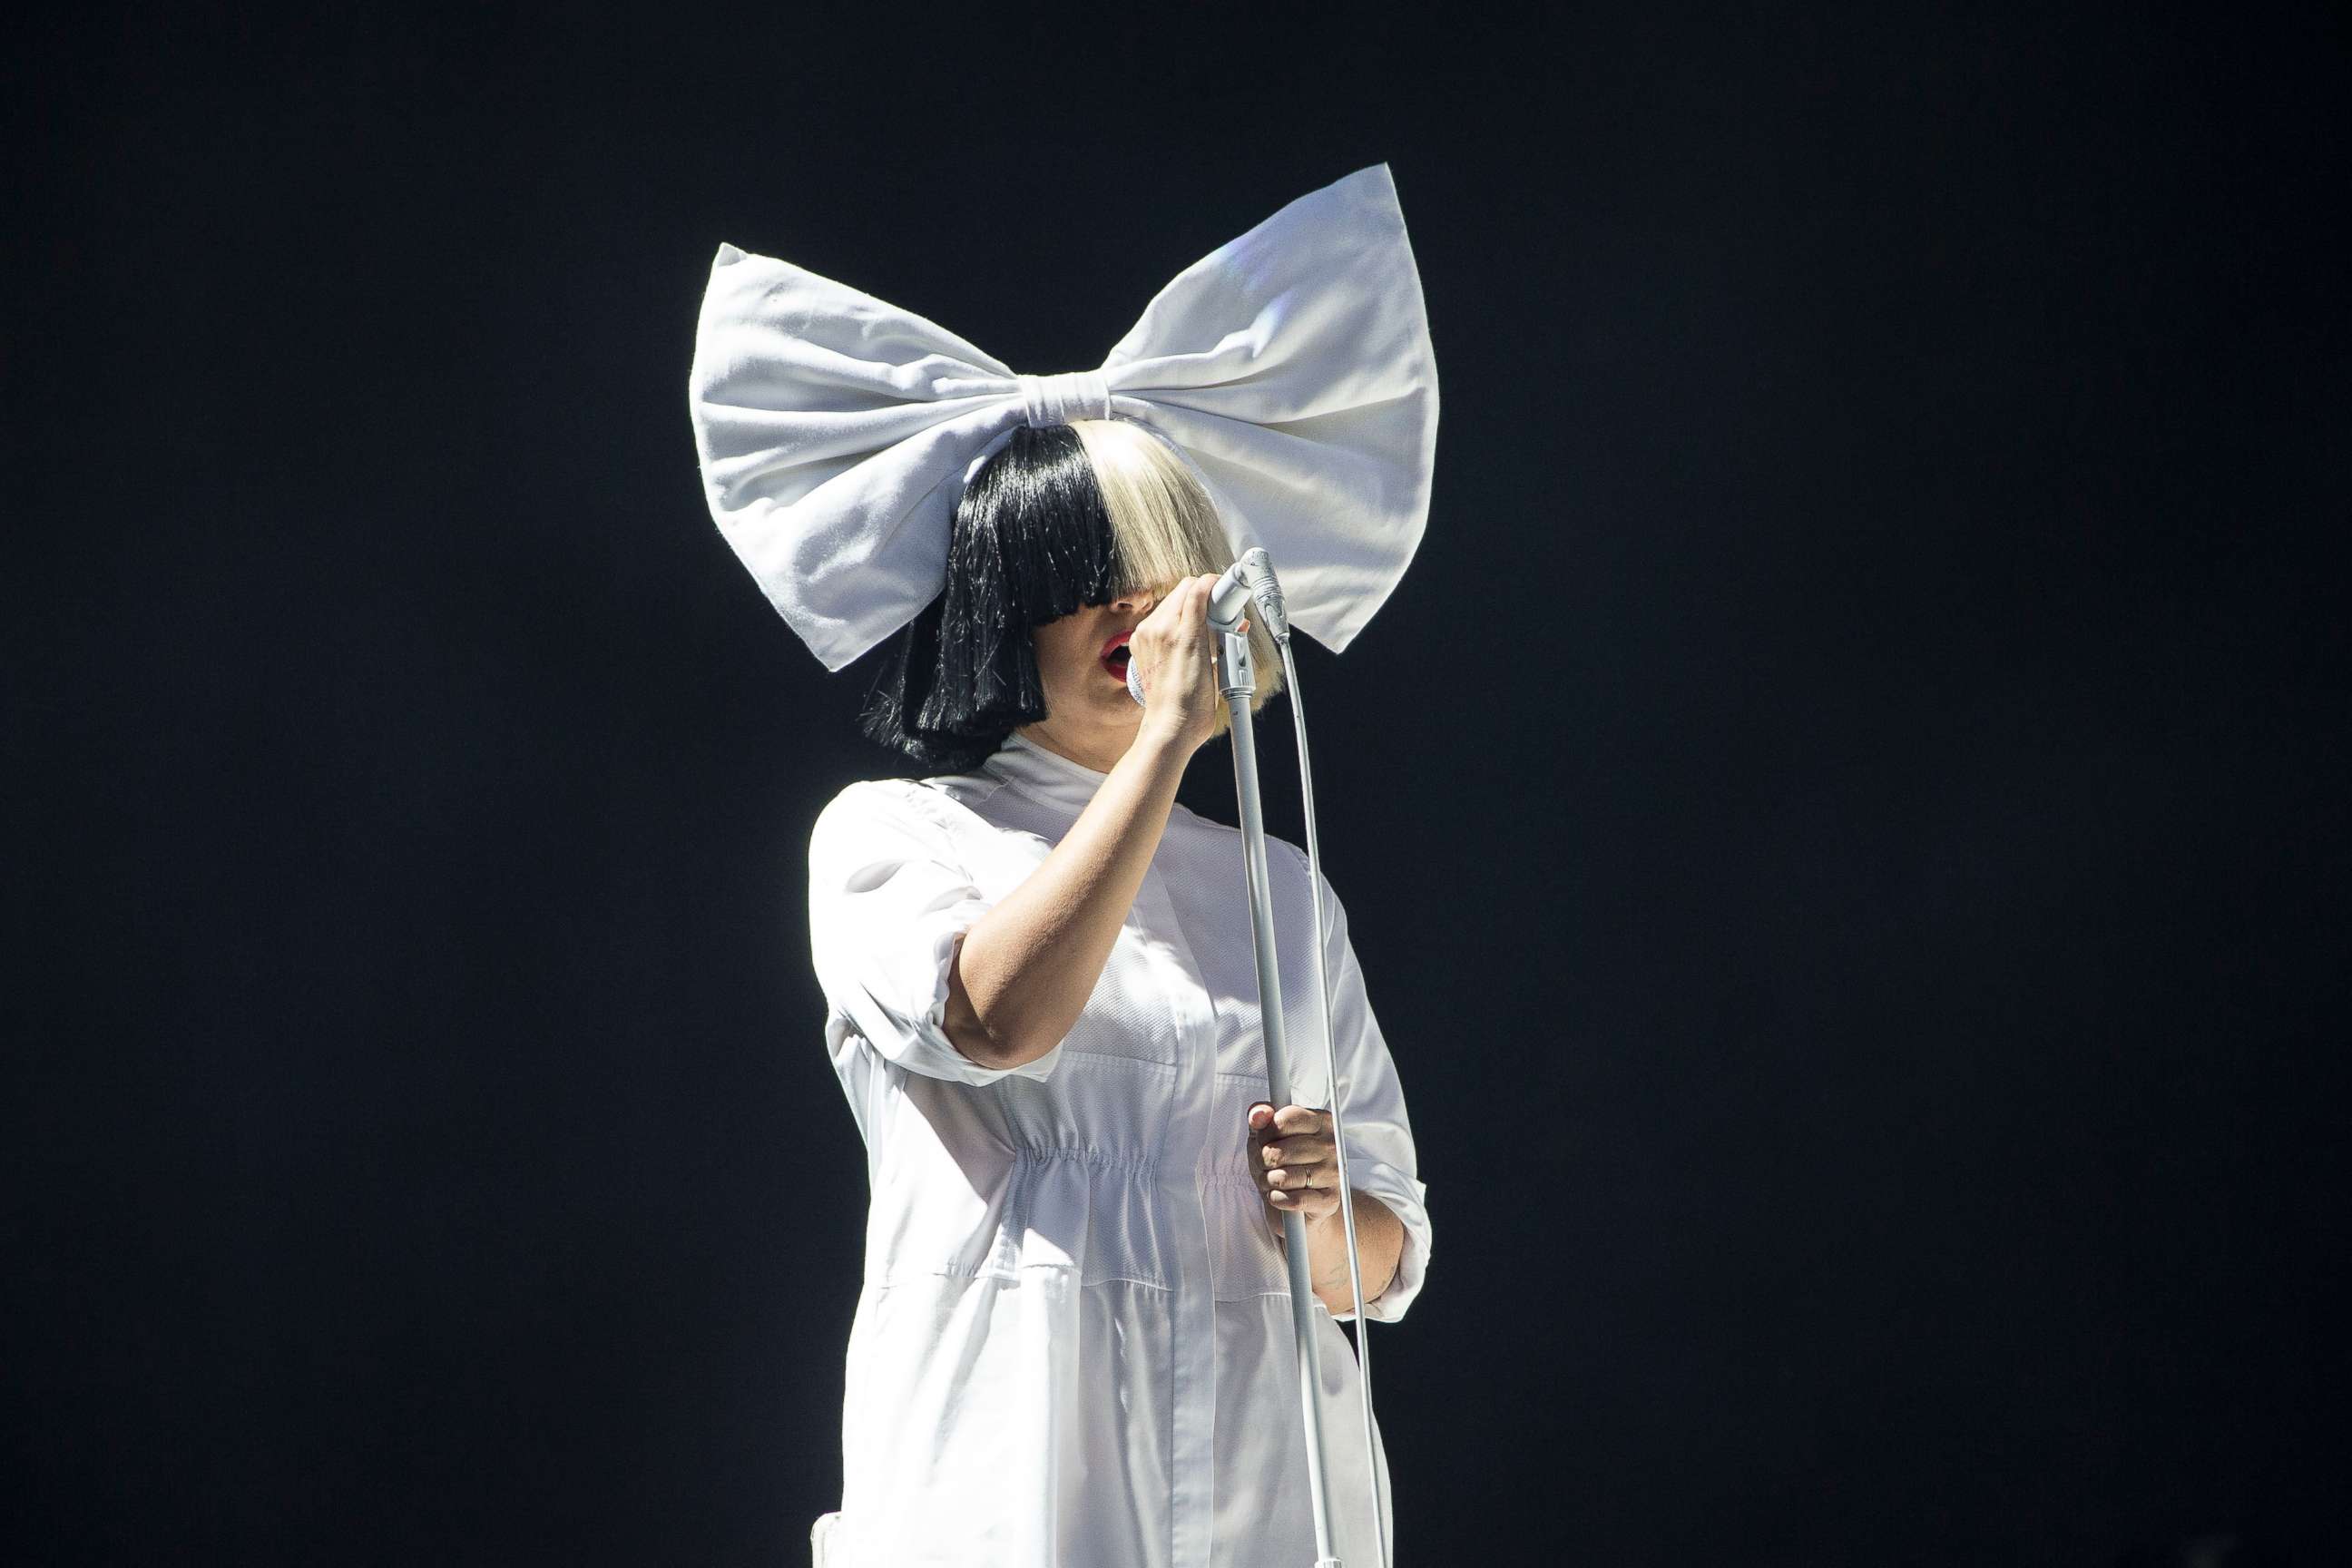 PHOTO: In this Aug 20, 2016 file photo, Sia performs as part of the V Festival in Hylands Park, Chelmsford.